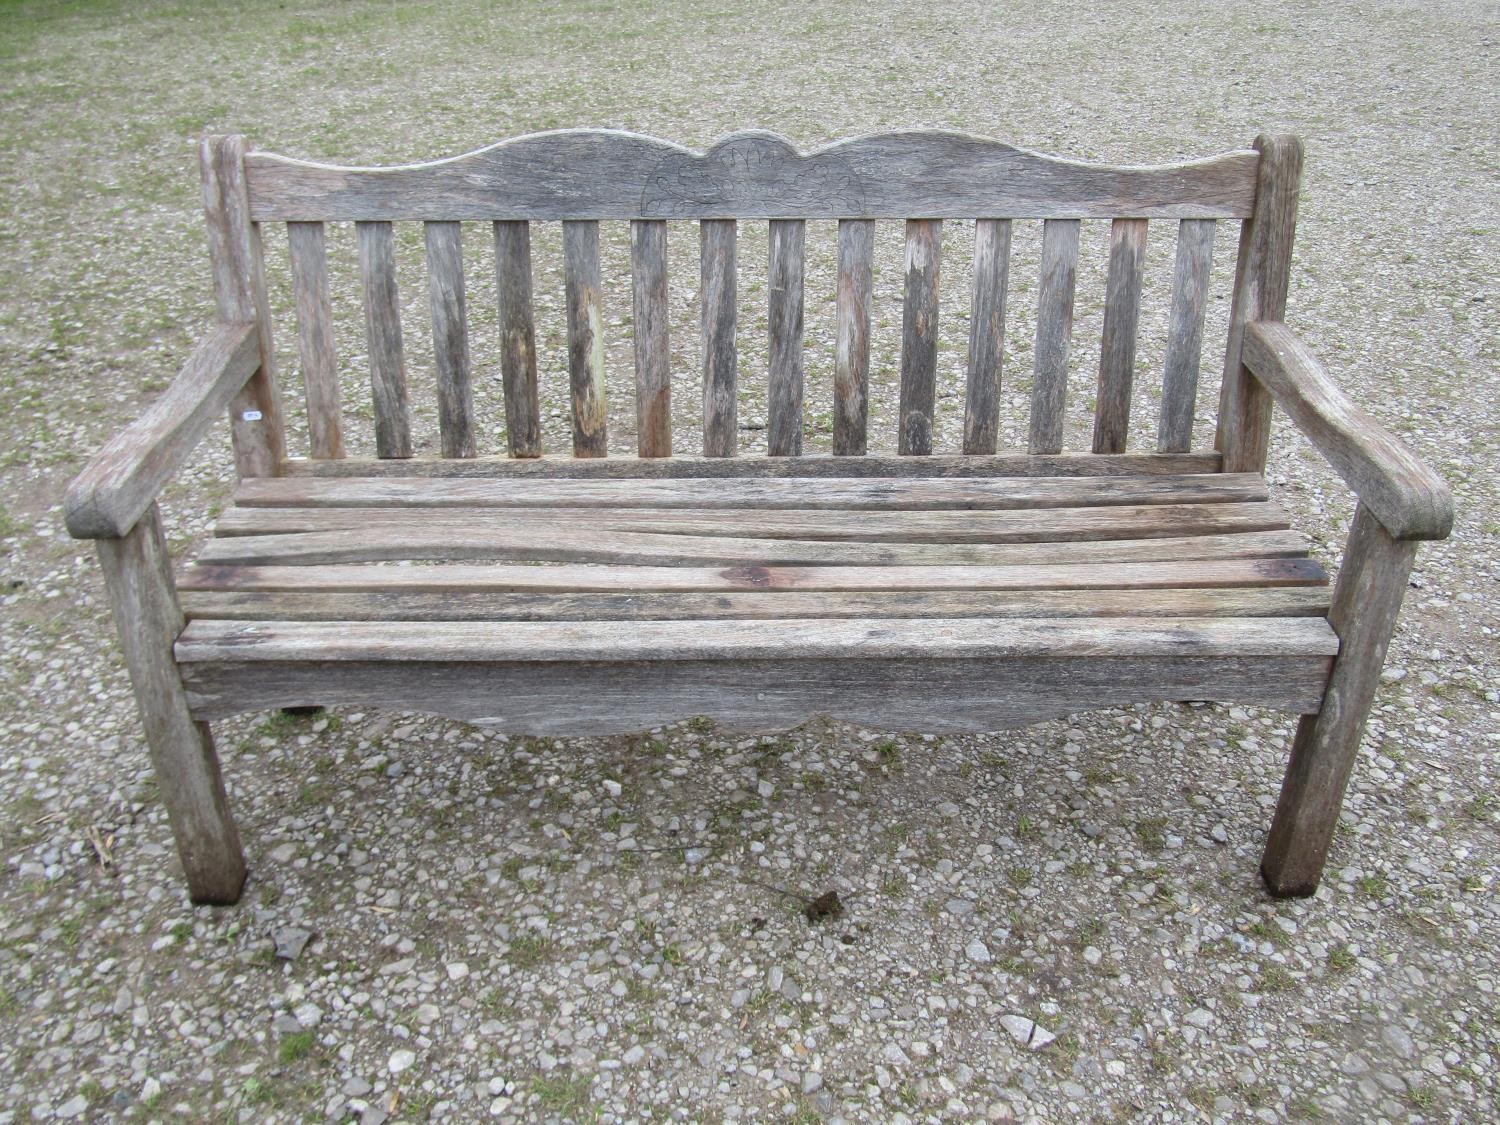 A Bridgman weathered teak three seat garden bench with slatted seat and back beneath a shaped rail